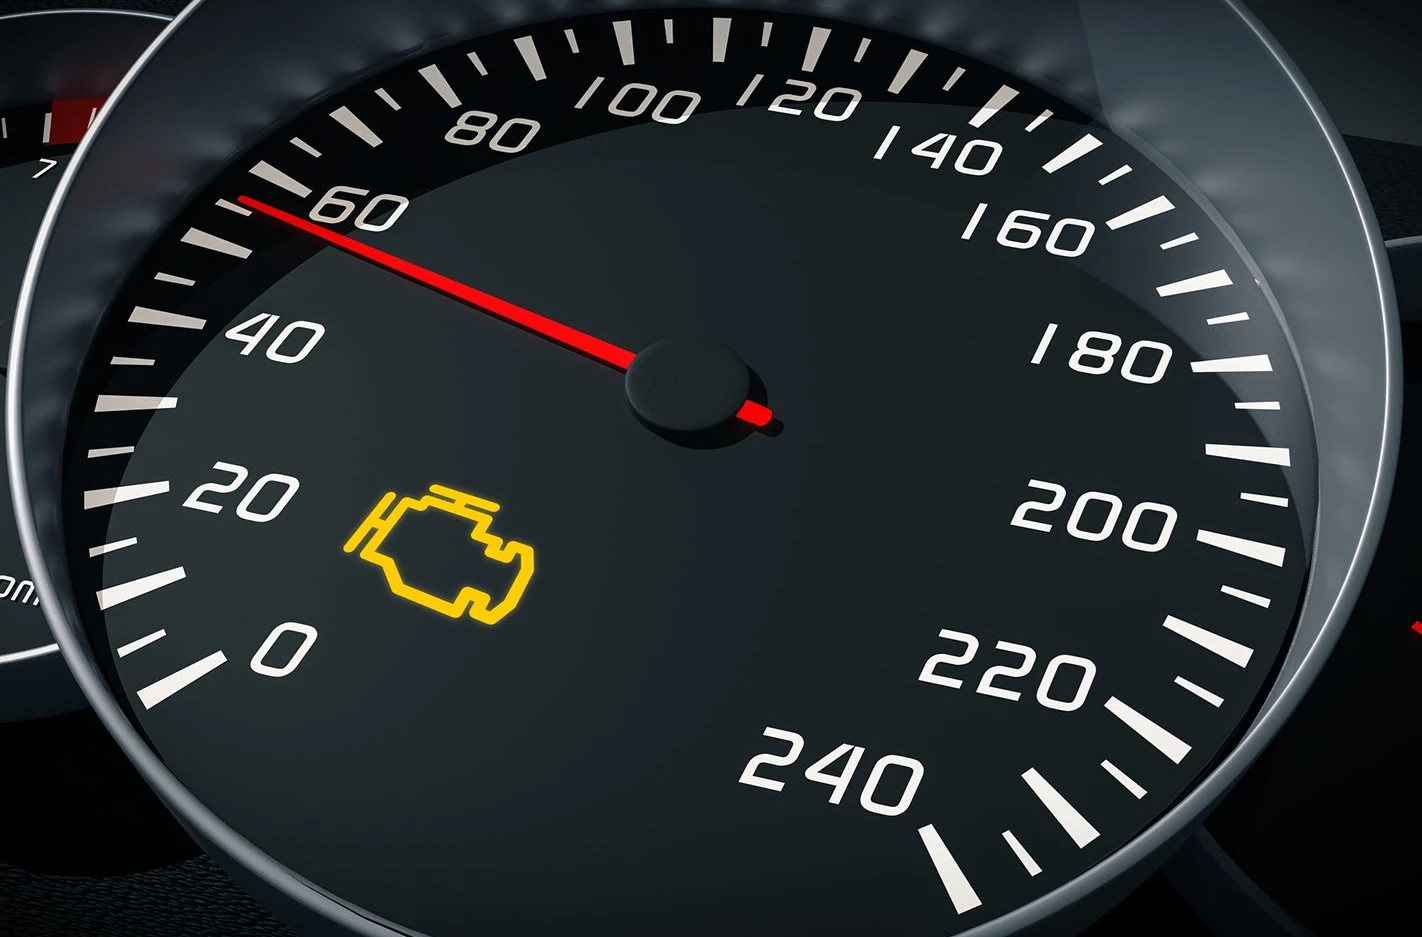 A speedometer of a car

Description automatically generated with medium confidence